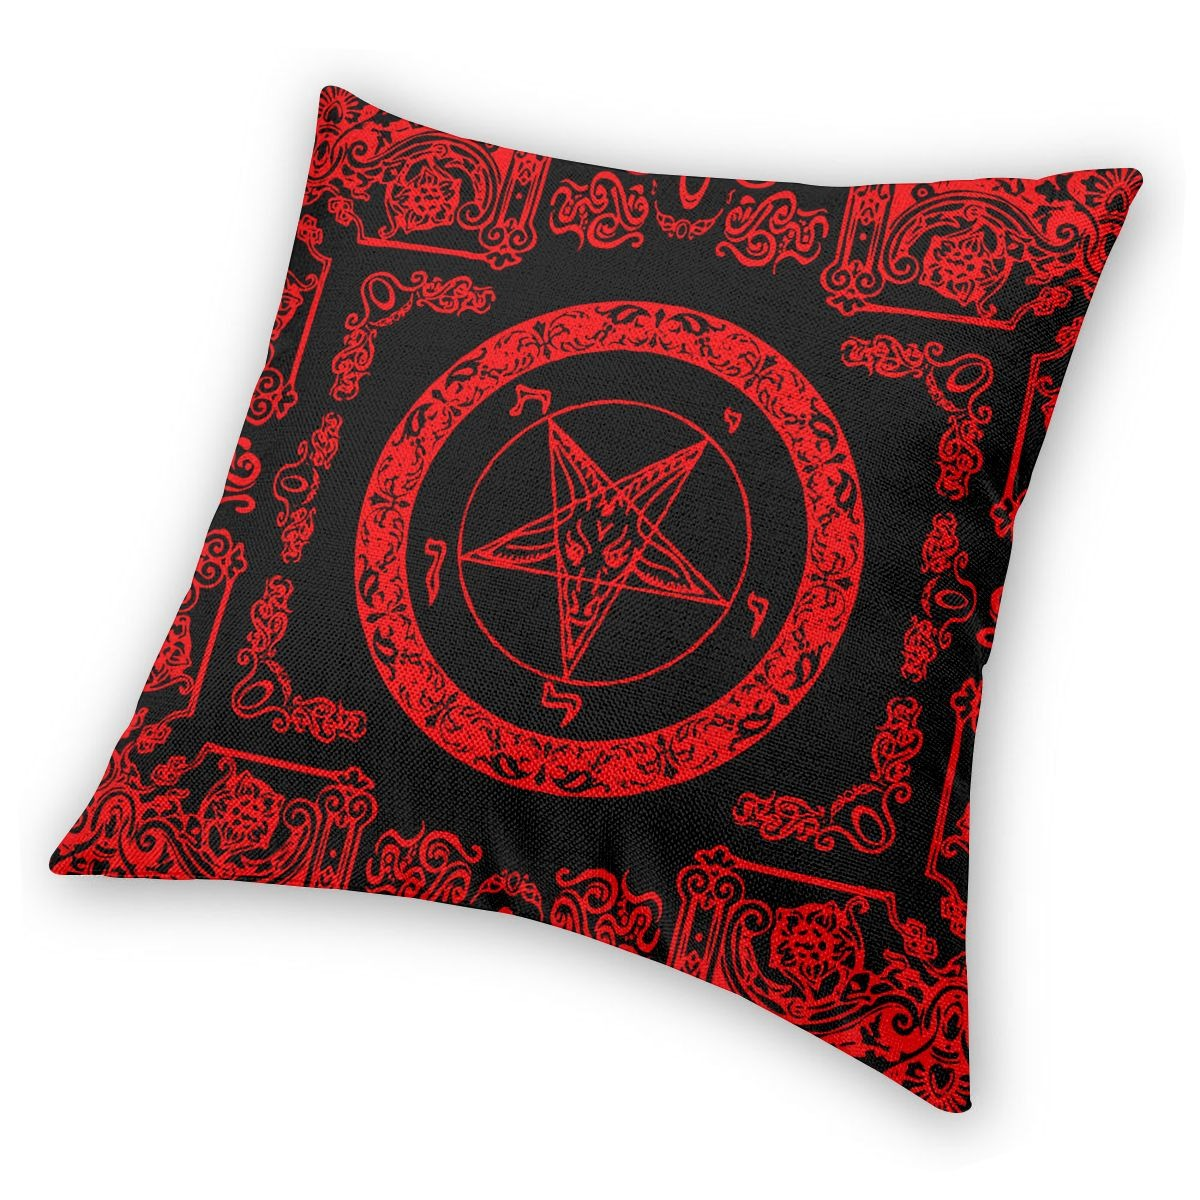 Pillowcase for Cushions with Double-sided Printing of Decorative Satanic signs / Pillows for Home - HARD'N'HEAVY